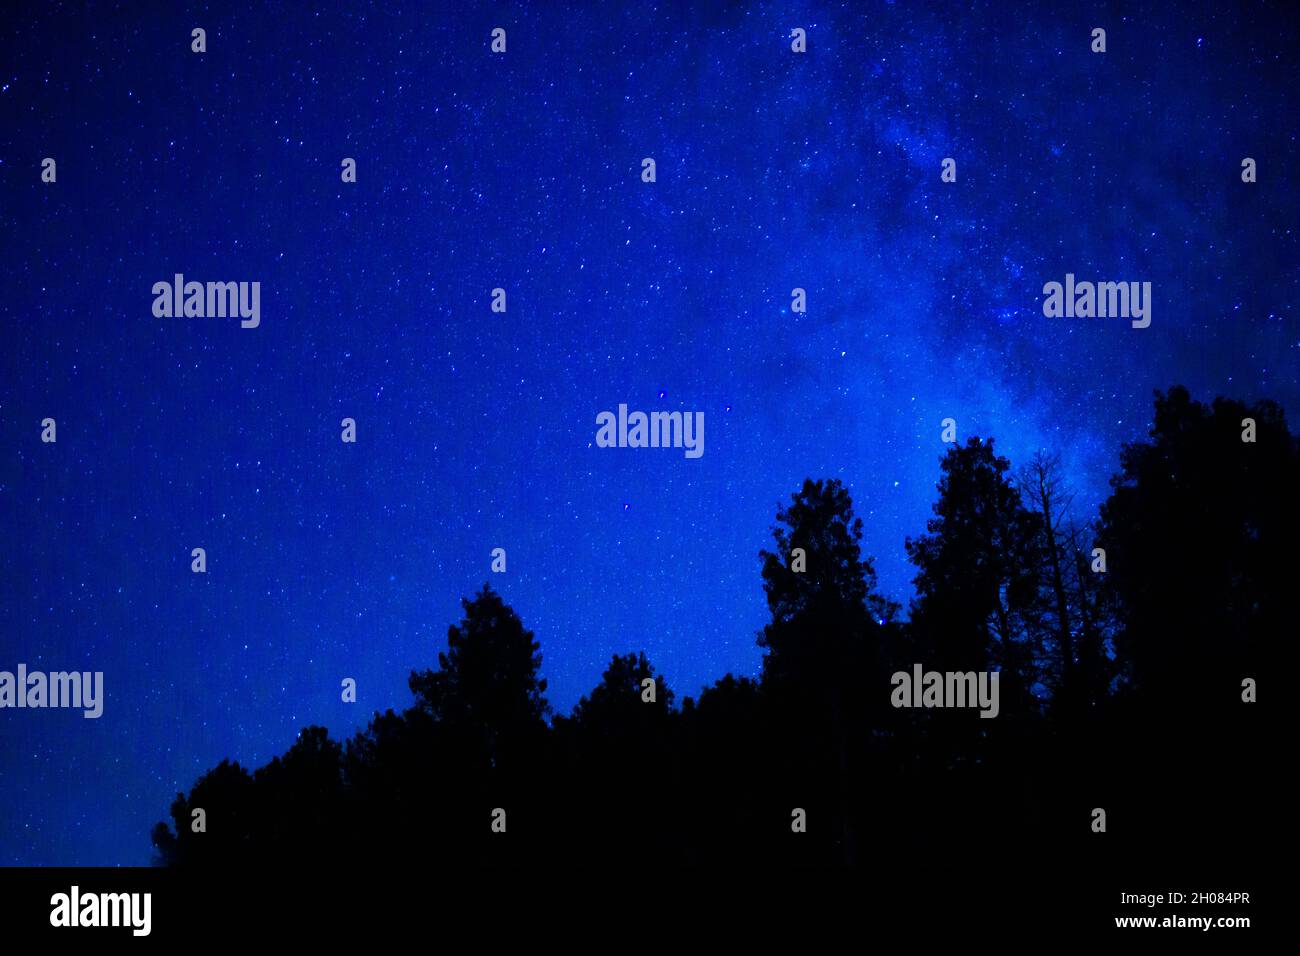 Star Filled Sky Over Pine Trees With Milky Way Stock Photo